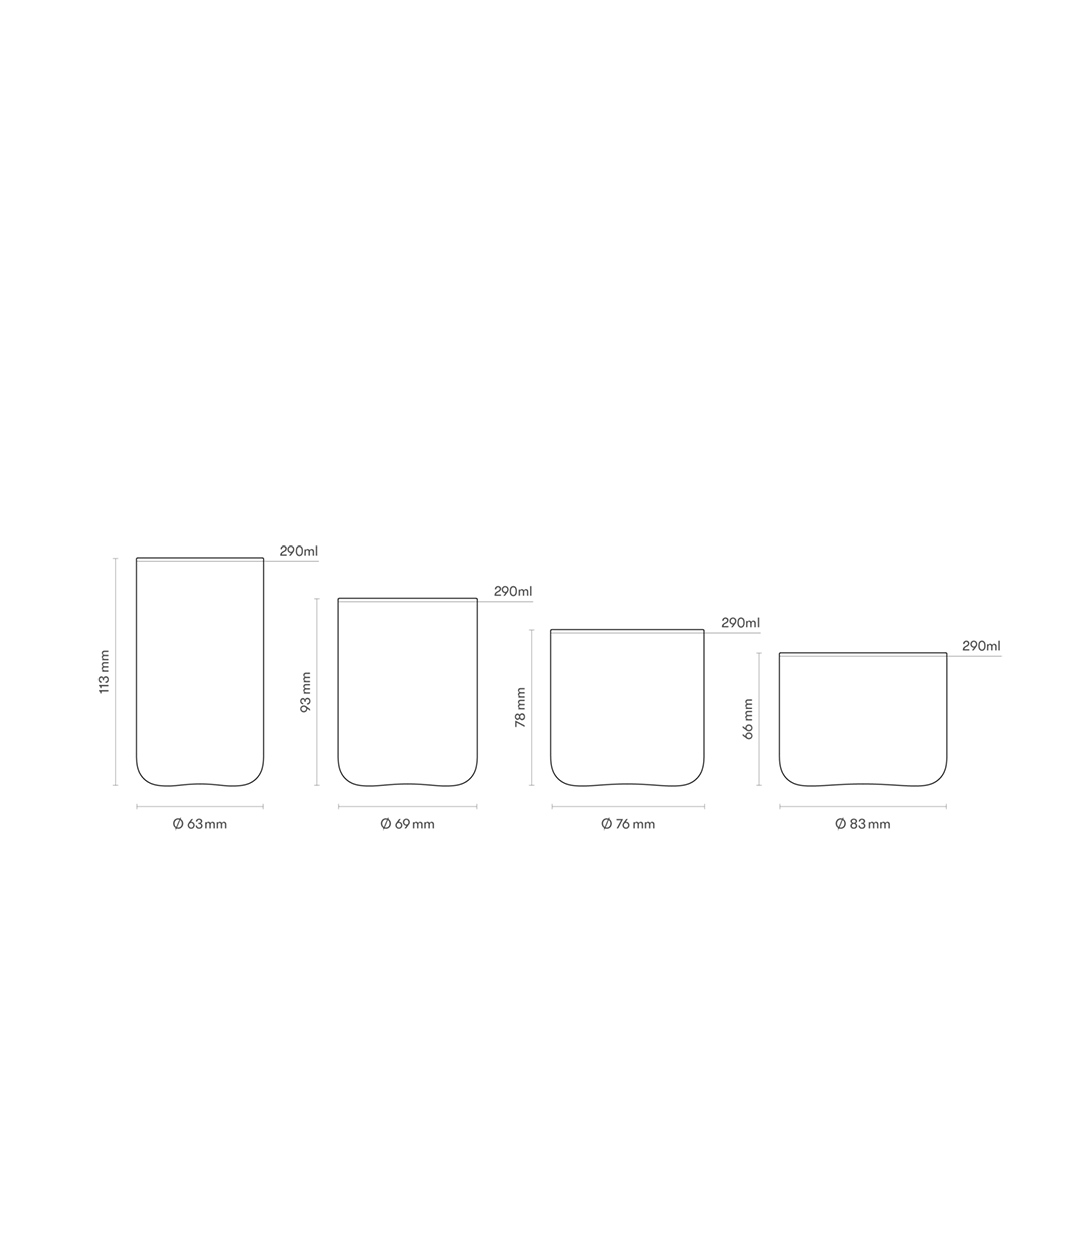 An illustration showing the dimensions for each Aarke Nesting Glass.